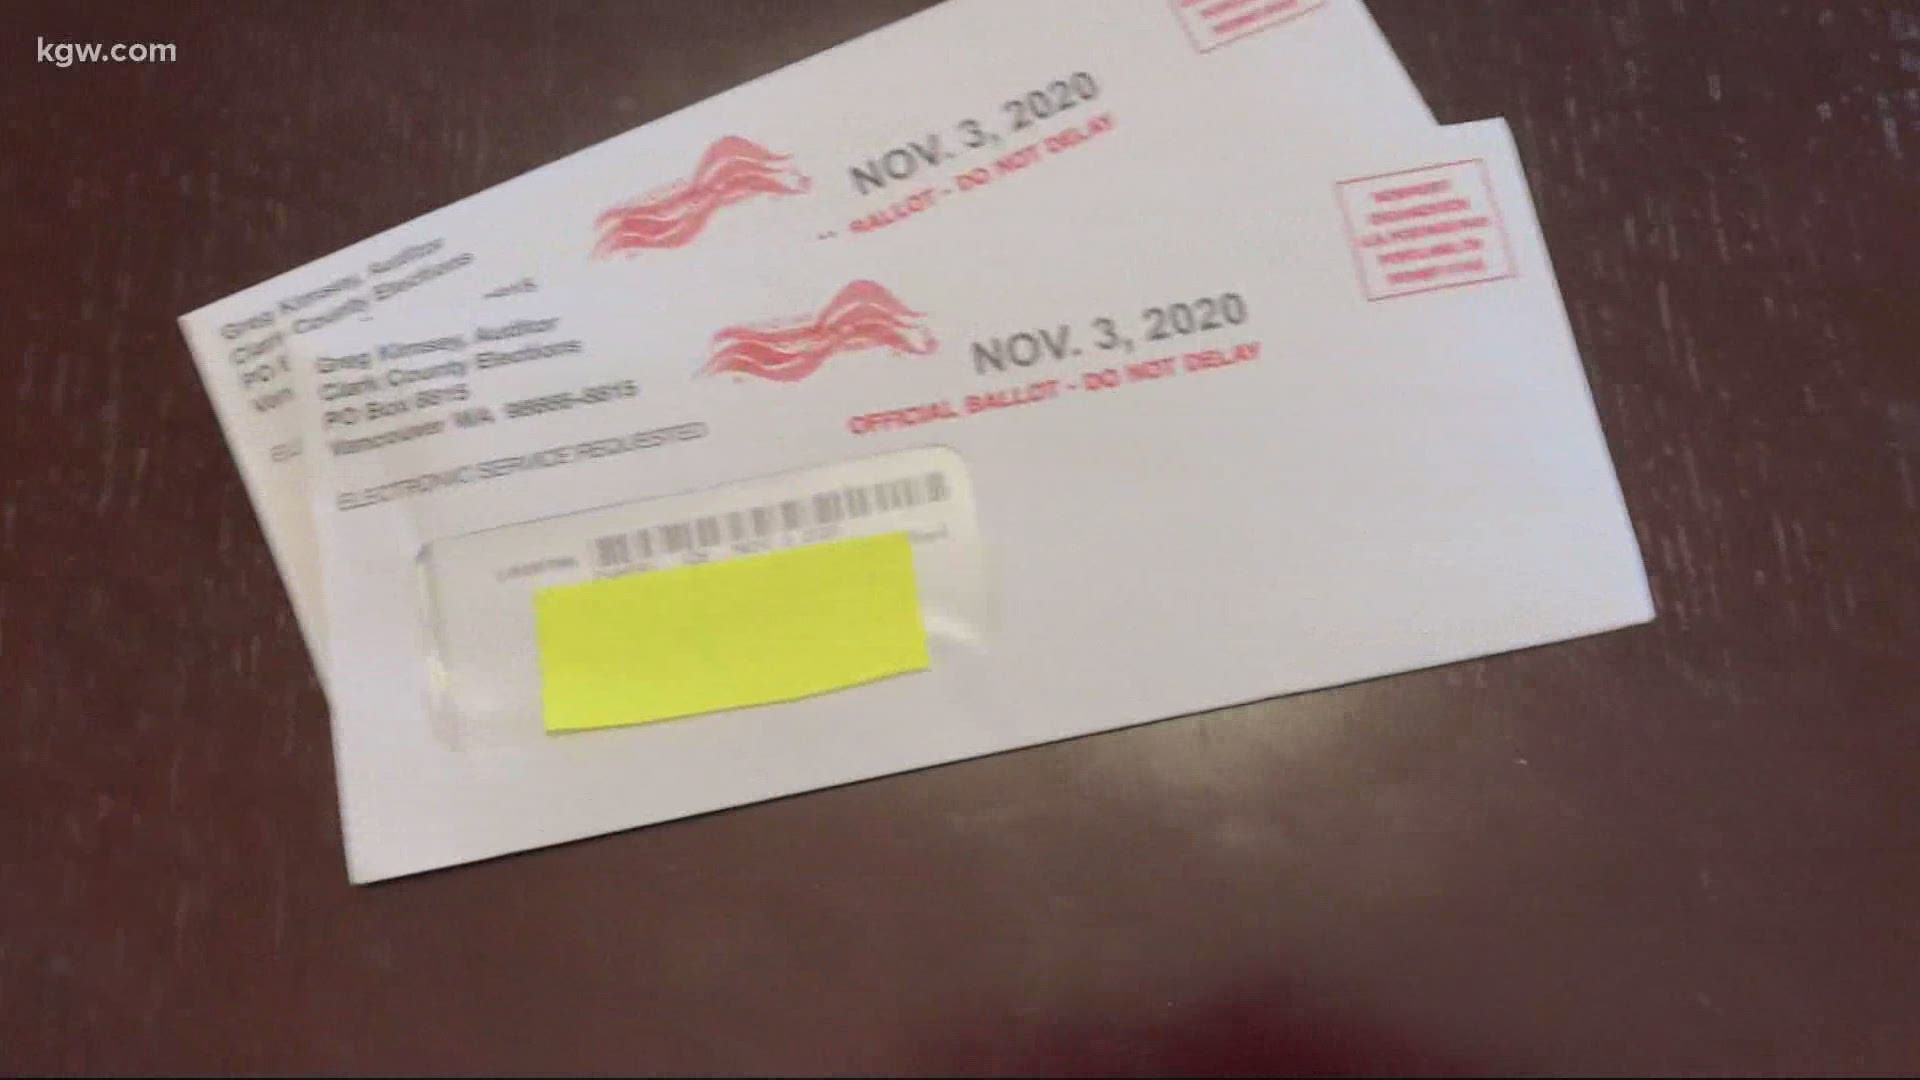 Did you get your ballot in the mail? It should have arrived by now. Pat Dooris has the latest on the election.